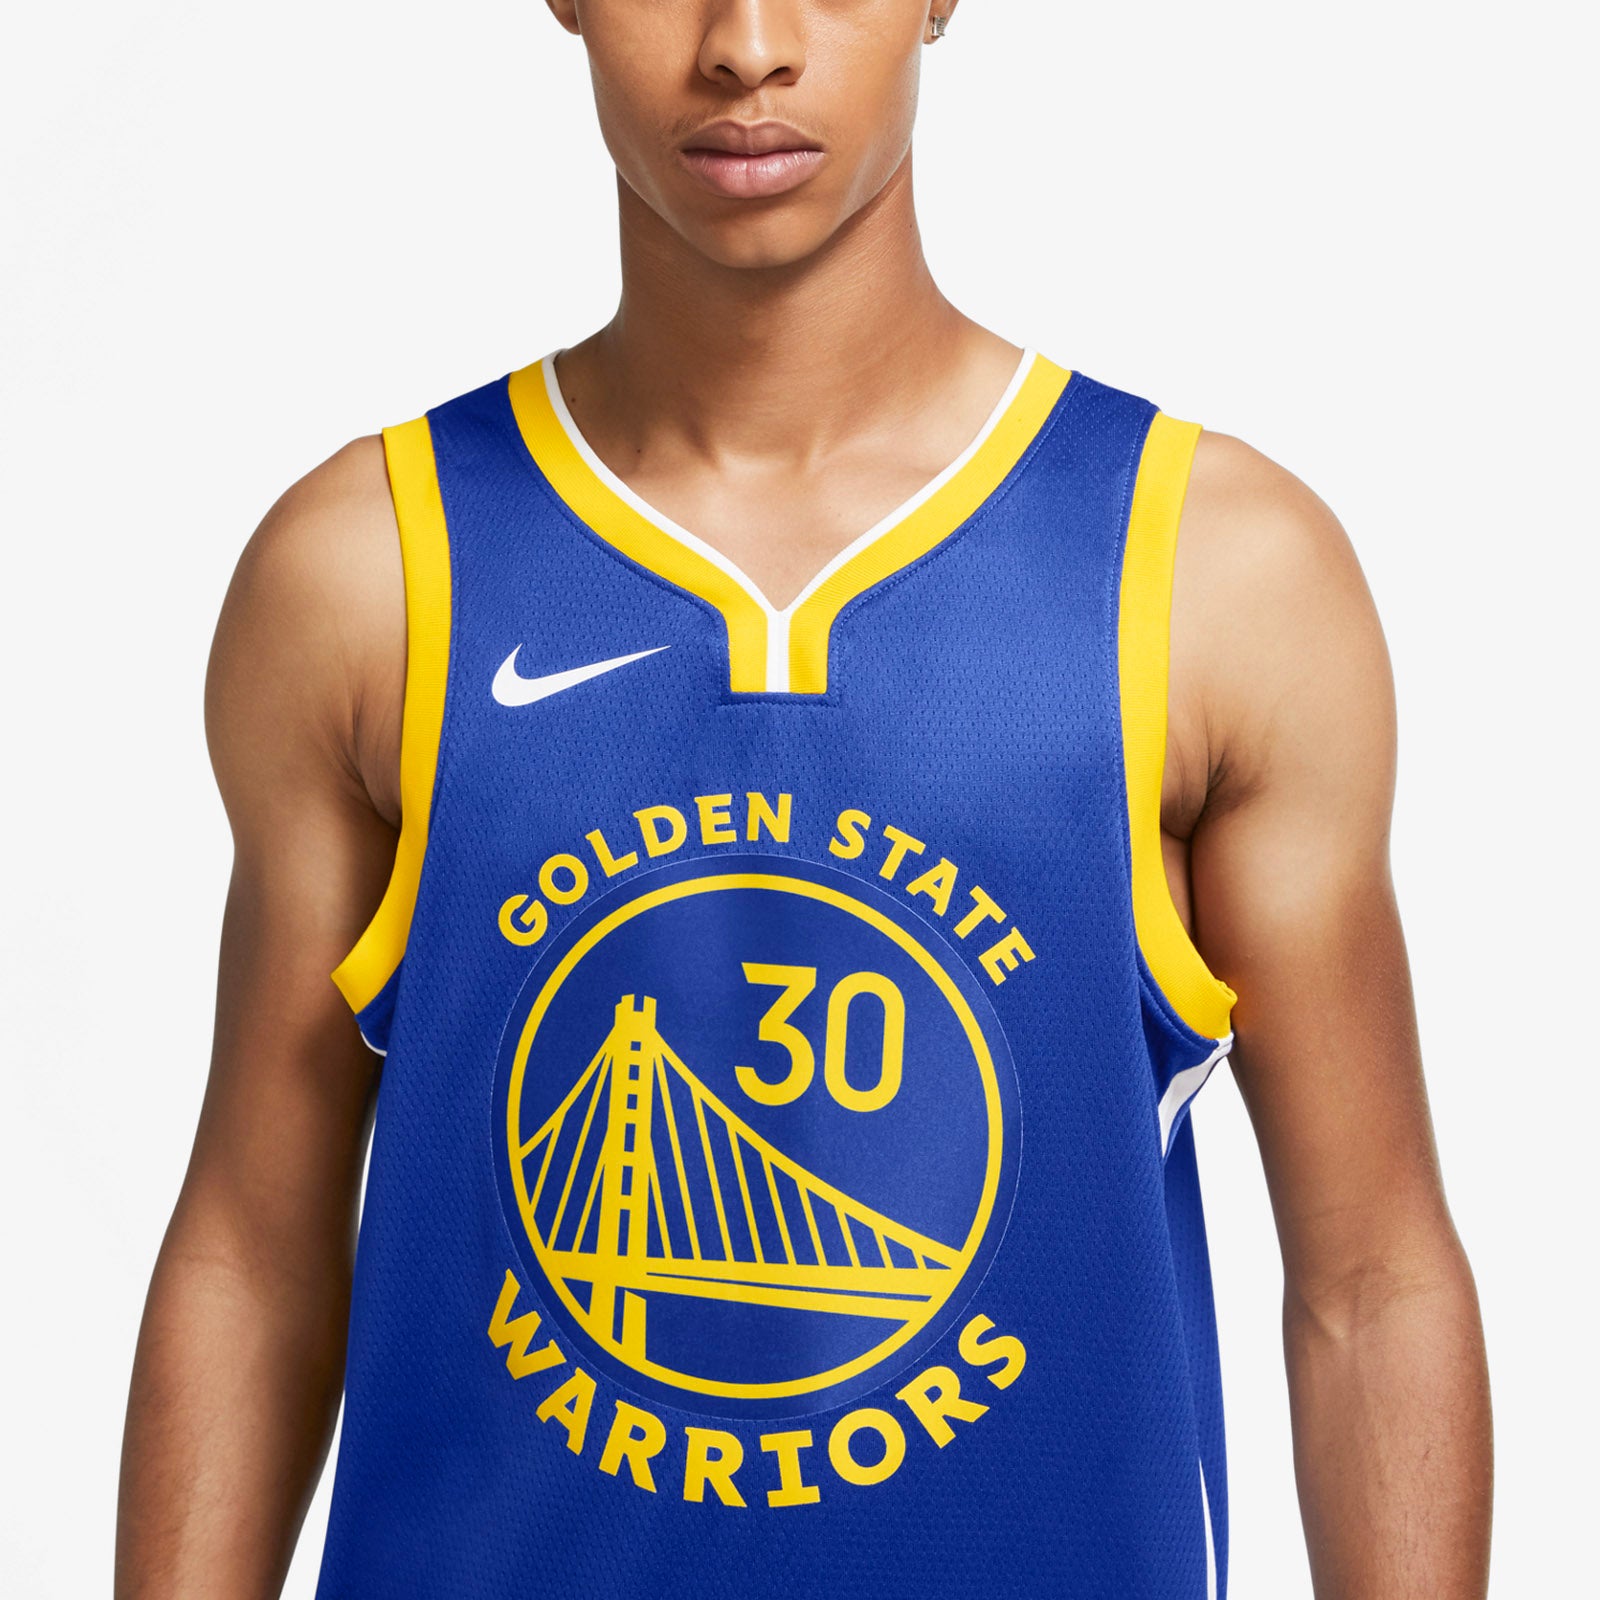 Golden State Warriors Stephen Curry Autographed Blue Nike Icon Edition  Jersey Size 48 Beckett BAS QR Stock #215821